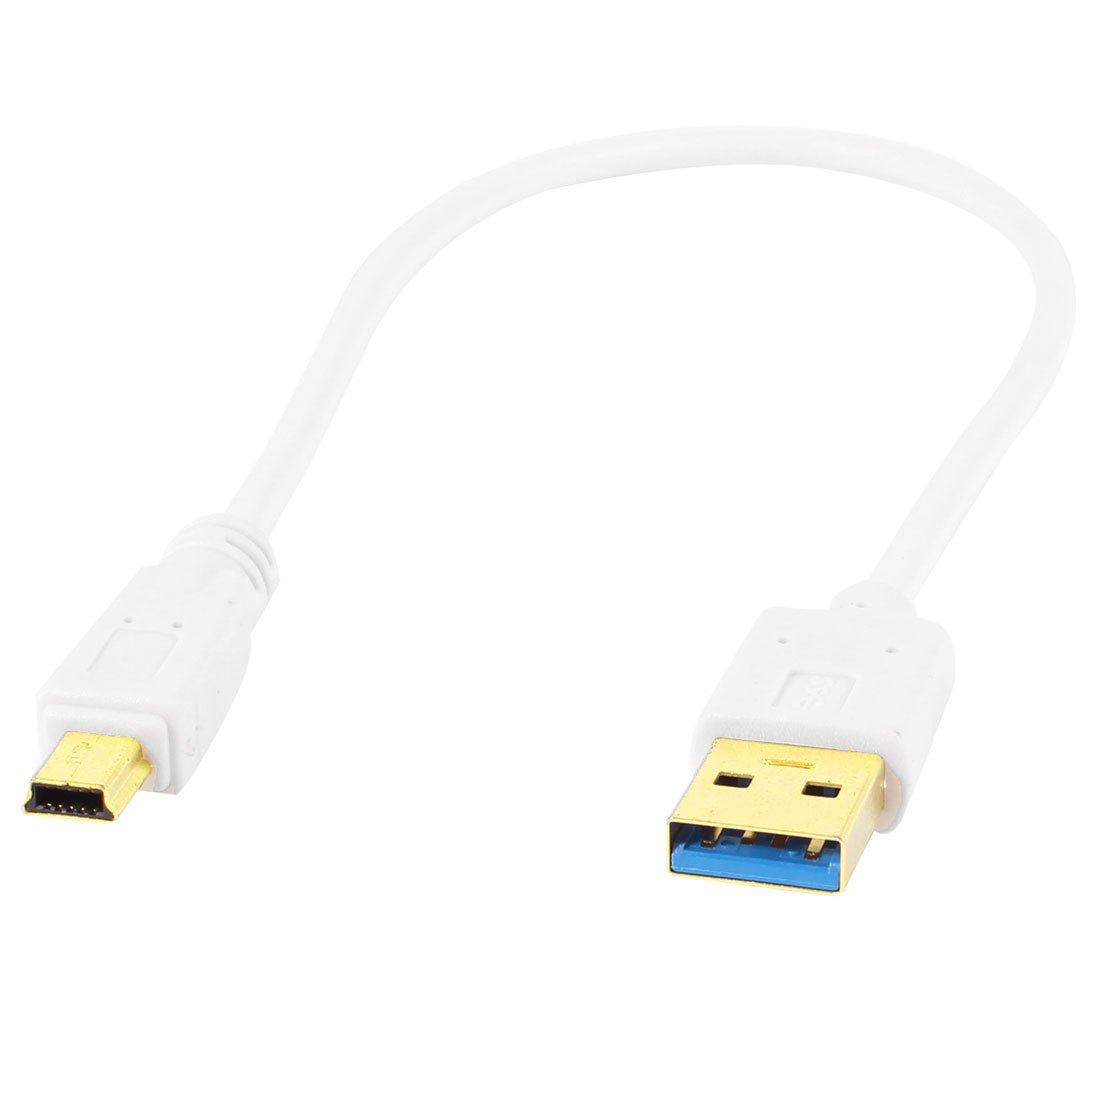 Hot sale!White Superspeed USB 3.0 Type A Male to Mini B 10 Pin Cable 30cm